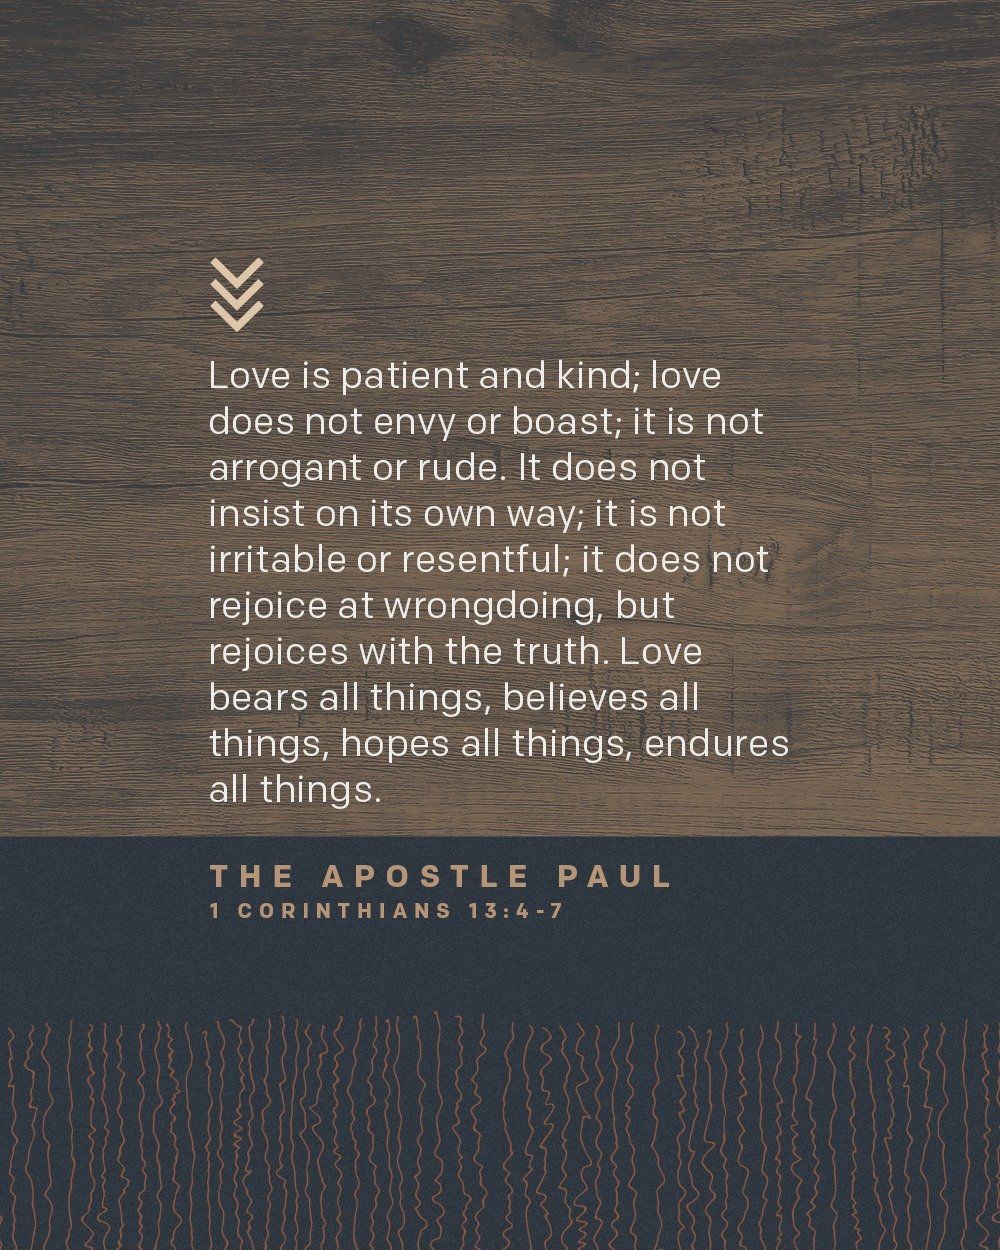 In this passage of scripture, Paul gives us a masterclass on love&mdash;not just as a warm fuzzy feeling or fleeting emotion, but as a profound, unwavering commitment to the well-being of others. This passage goes beyond romantic love to encapsulate 